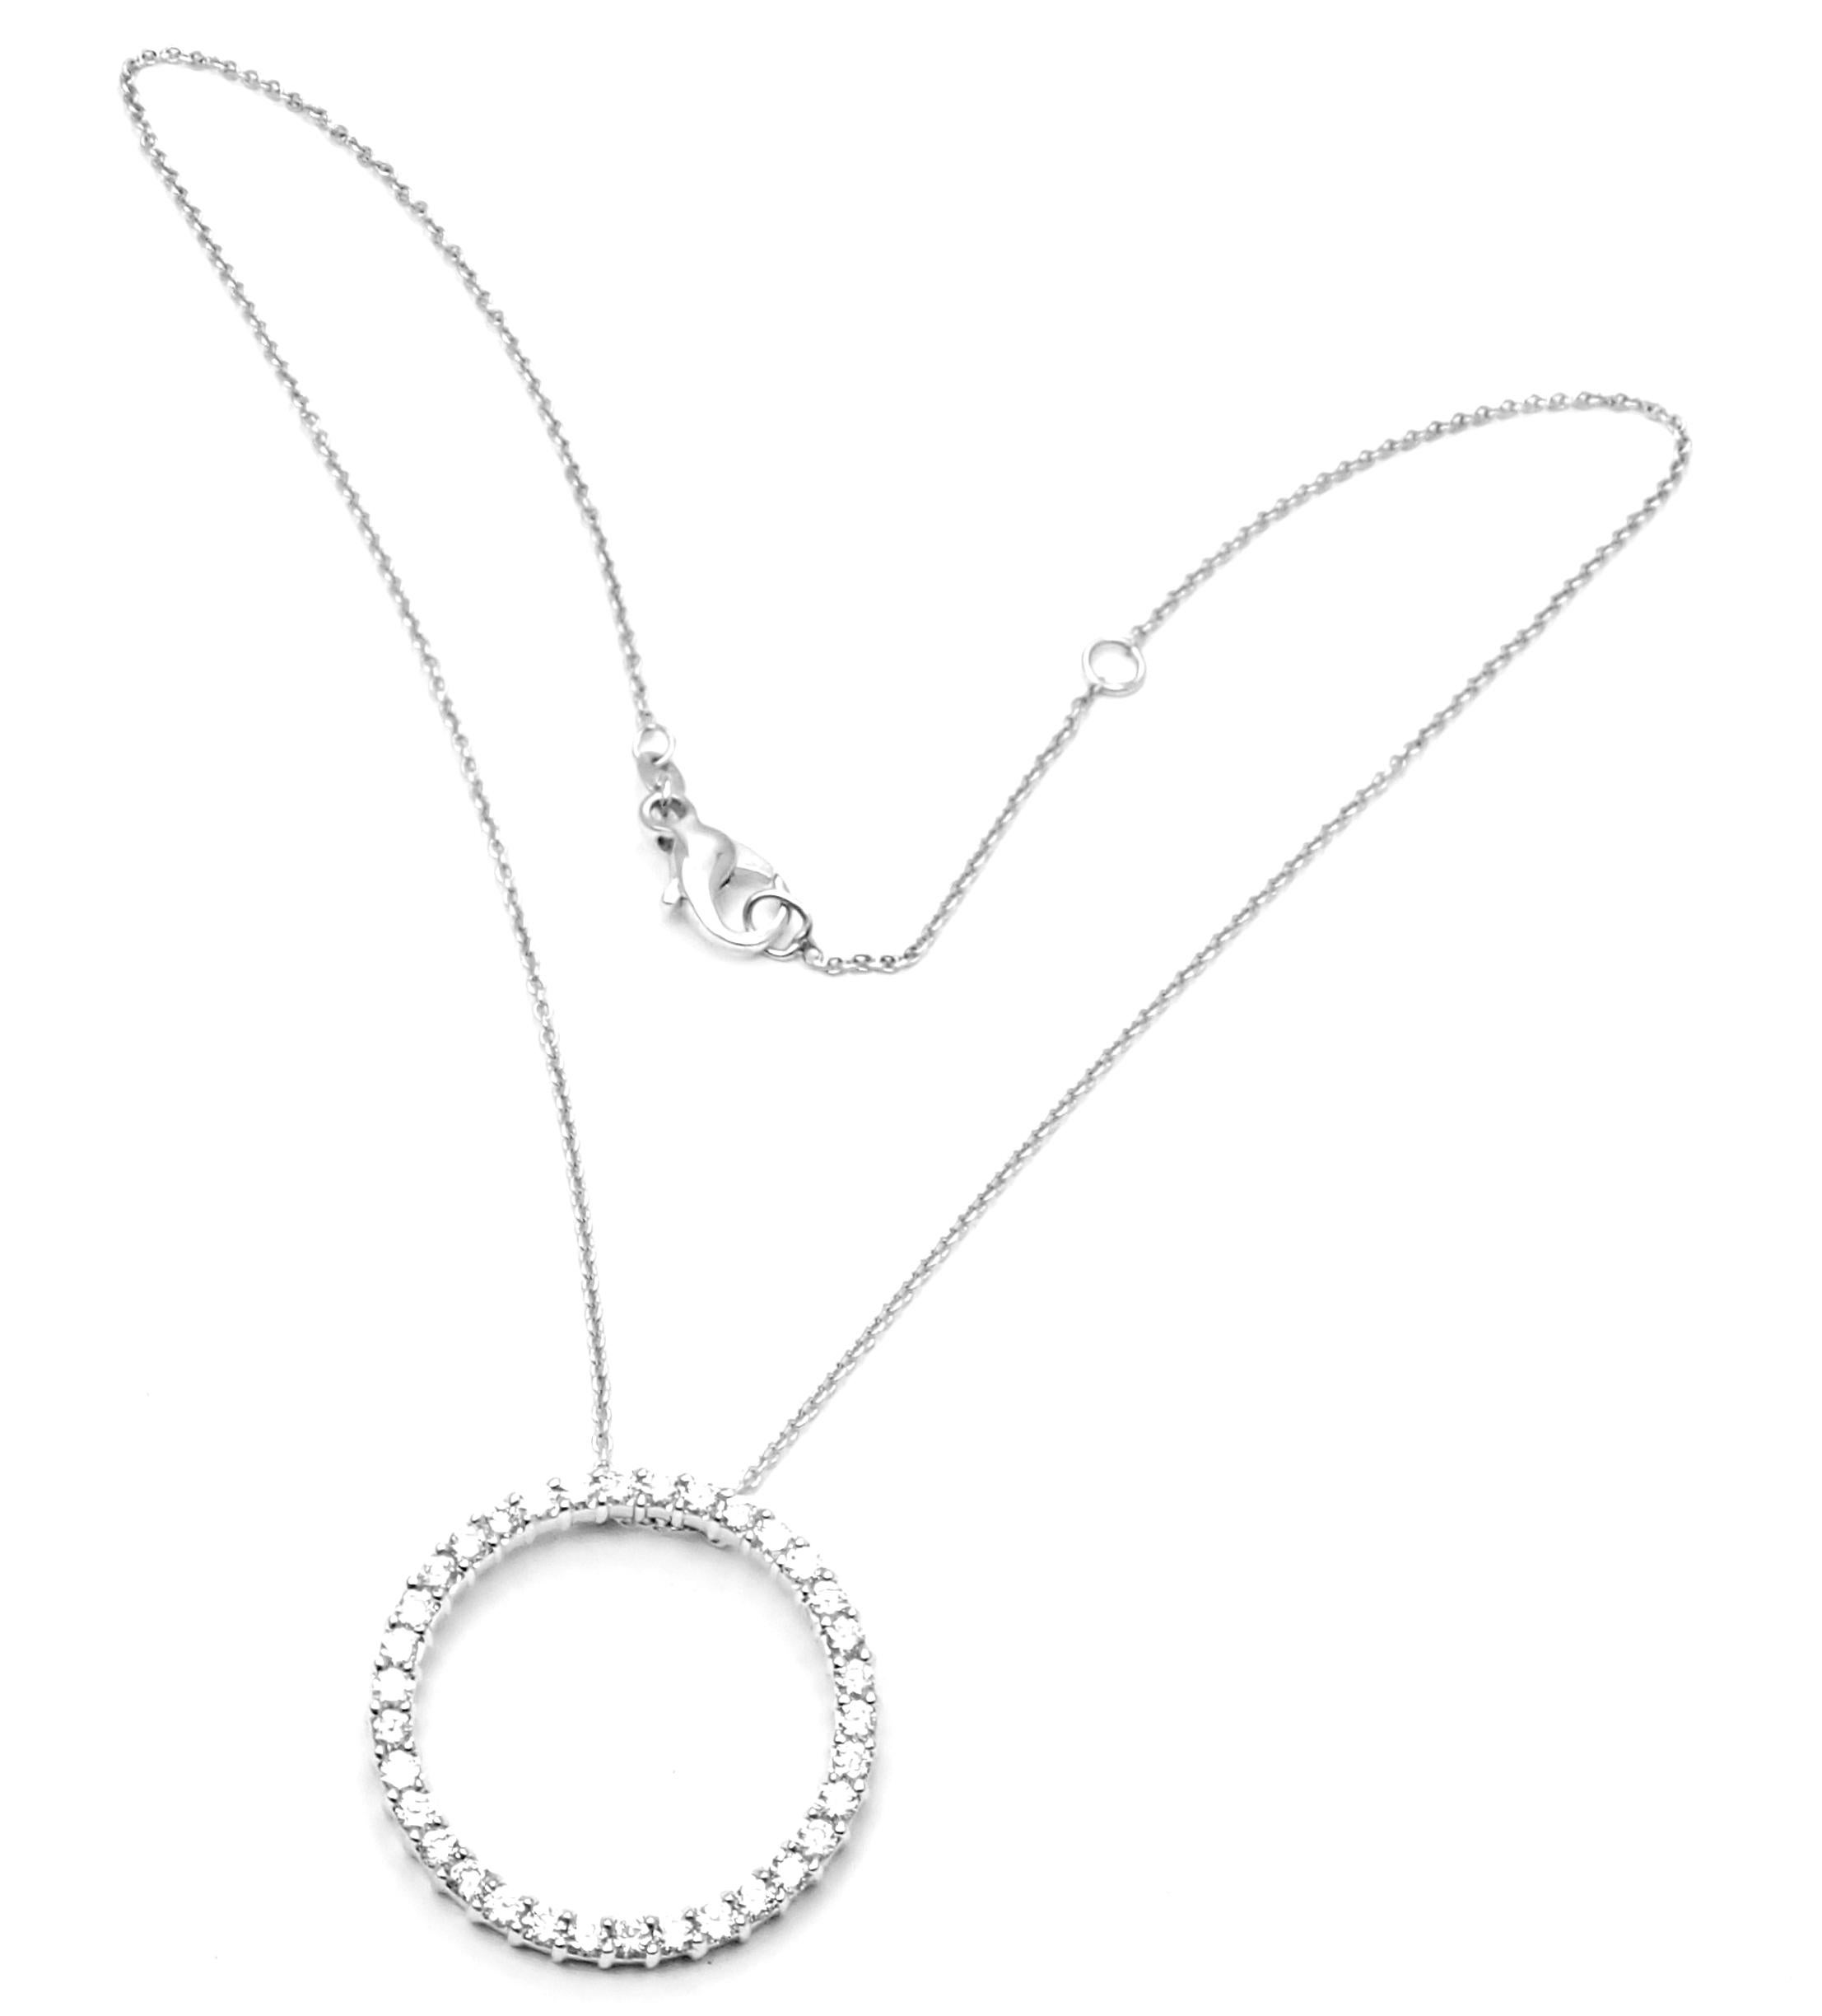 18k White Gold Circle Of Life Diamond Pendant Necklace by Roberto Coin. 
With 33 round brilliant cut diamonds VS2 clarity, G color total weight approx. 3.23ct
1 Round Ruby
Details:
Necklace Length: 18''
Pendant: 32mm
Weight: 7.3 grams
Stamped